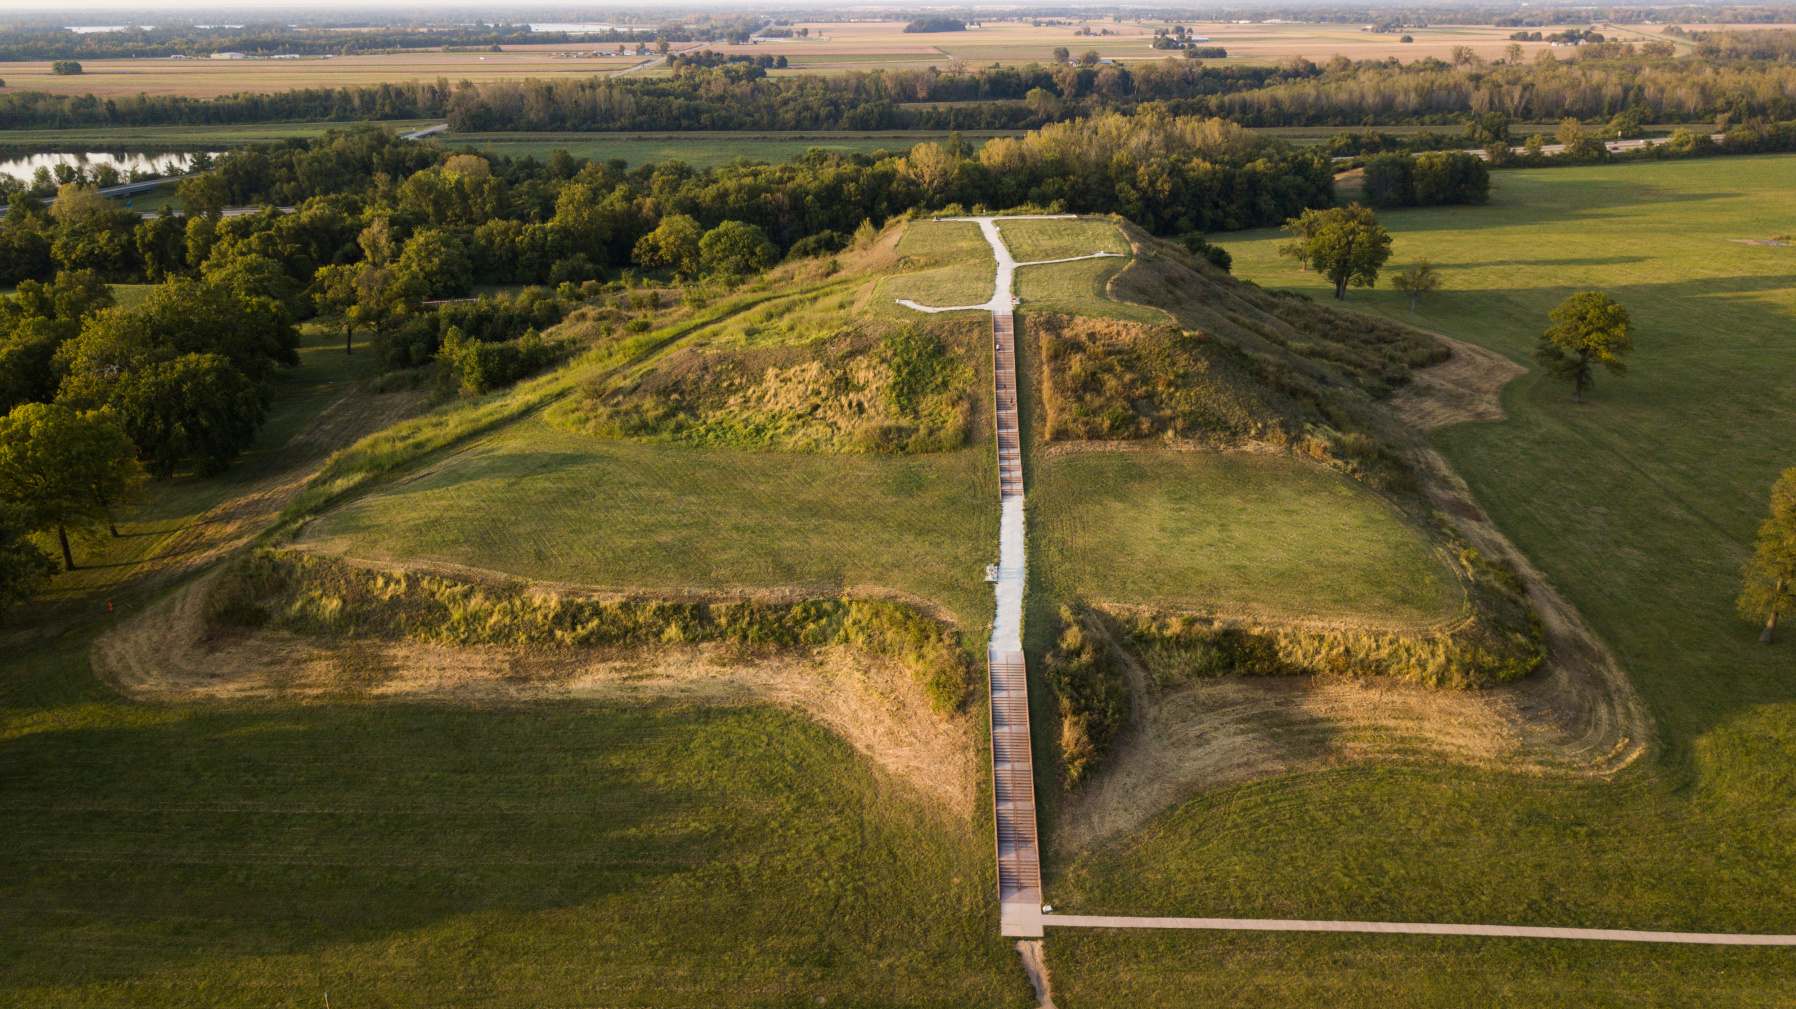 Monks Mound, built between 950 and 1100 CE and located at the Cahokia Mounds UNESCO World Heritage Site near Collinsville, Illinois, is the largest pre-Columbian earthwork in America north of Mesoamerica. A number of pre-Columbian cultures are collectively termed "Mound Builders".